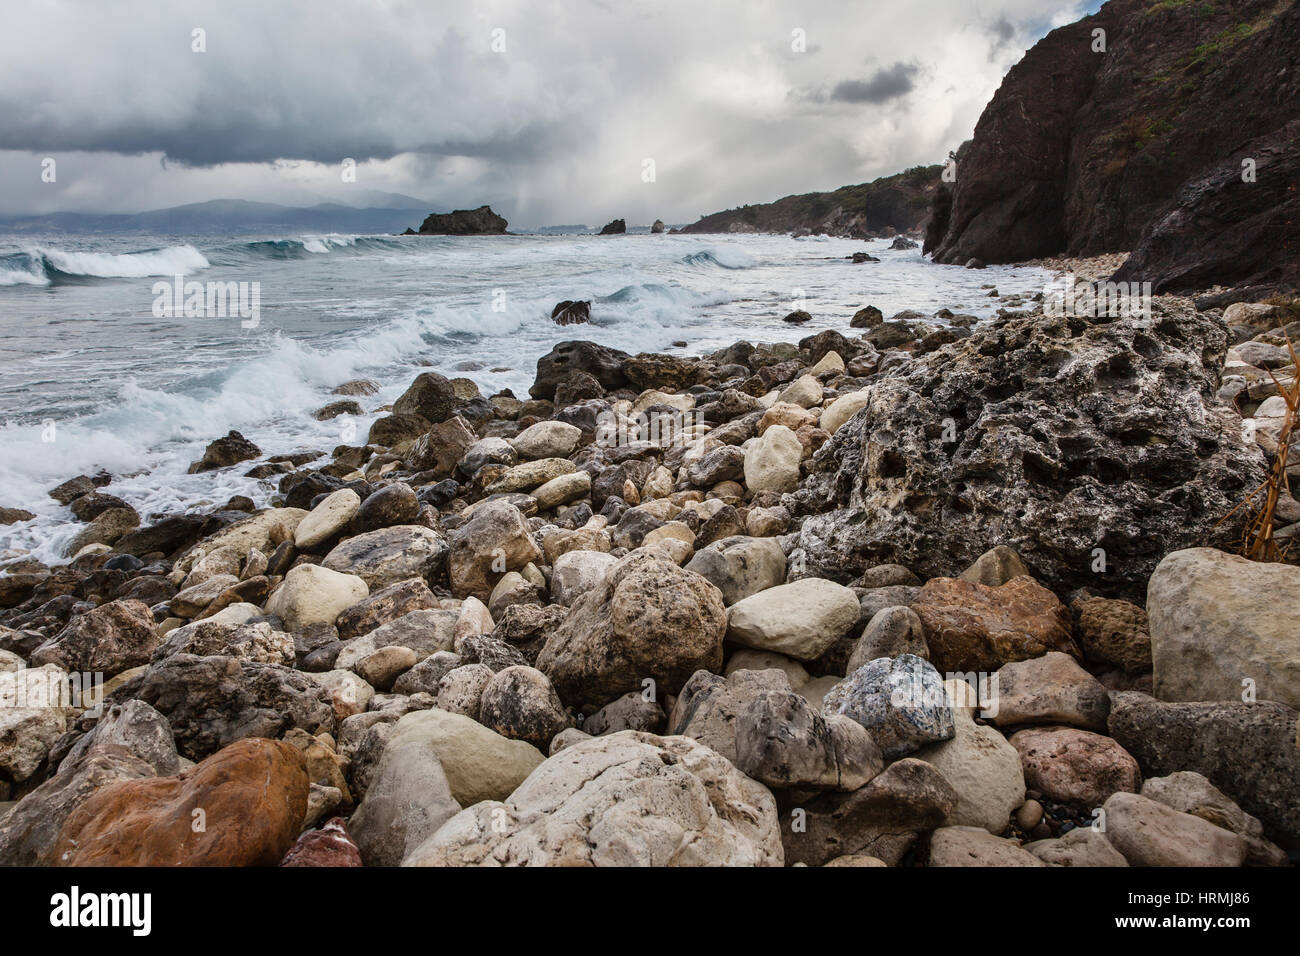 Rocky coast on a stormy day in winter near the Baths of Aphrodite, Cyprus Stock Photo